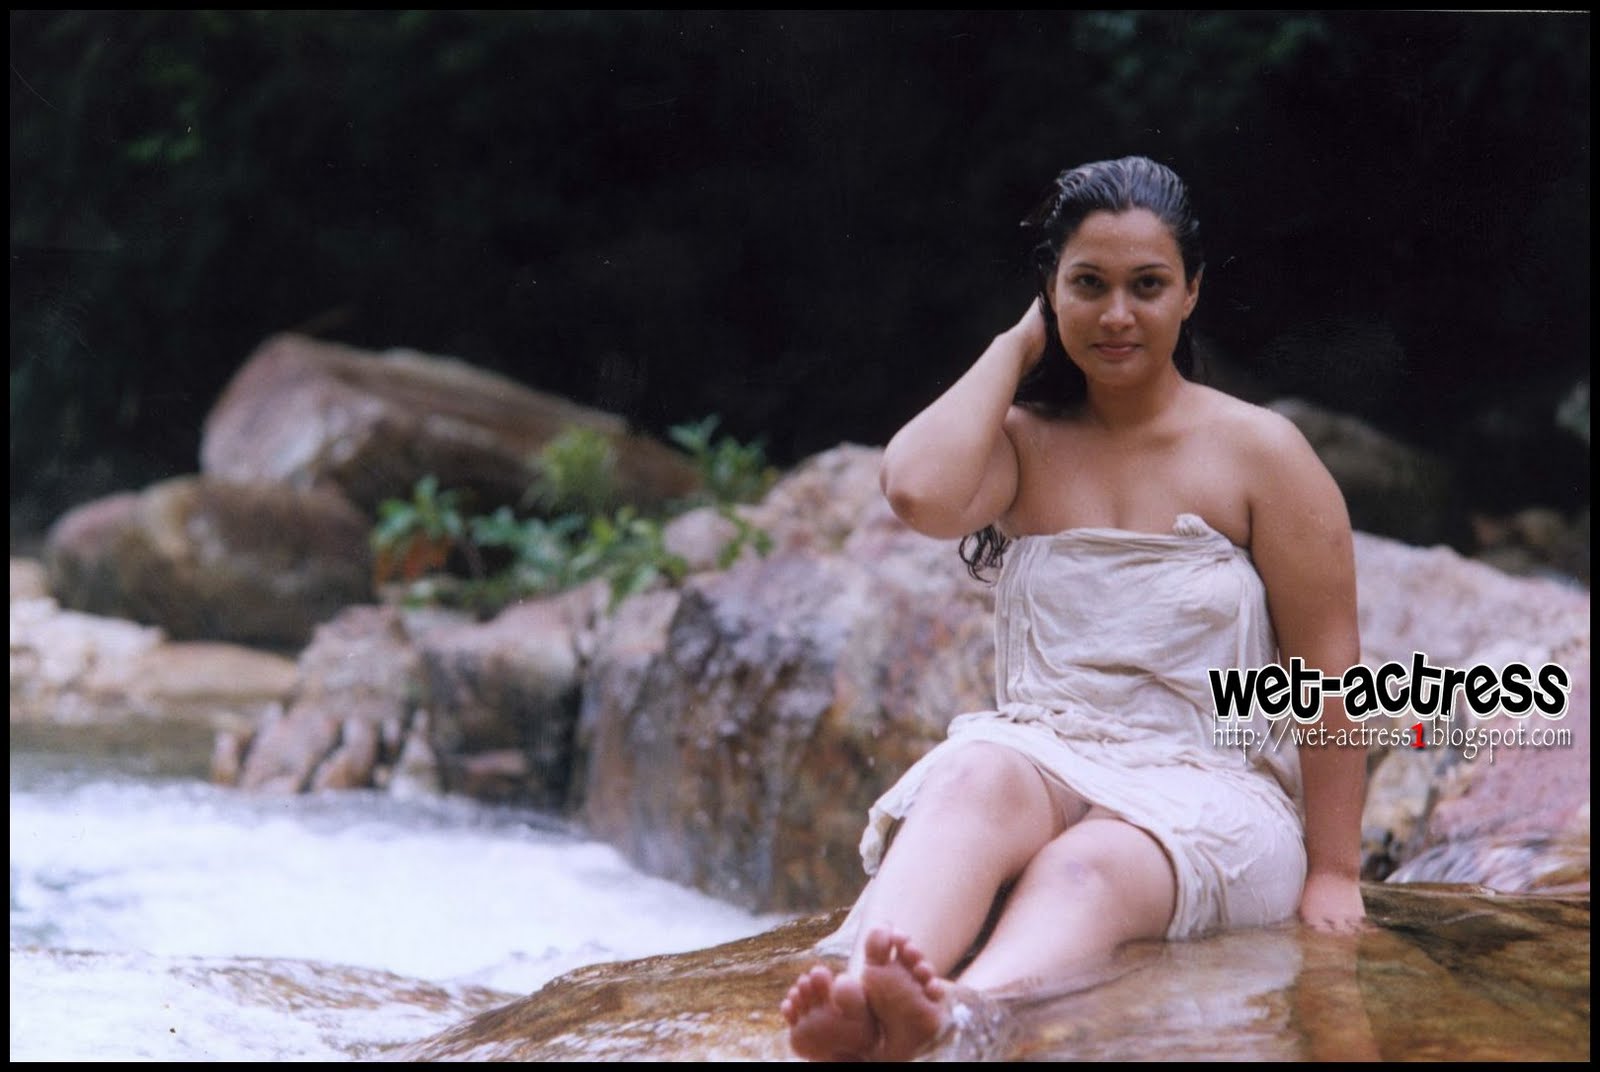 Thread: Wet actress hollywood-bollywood-kollywood collection